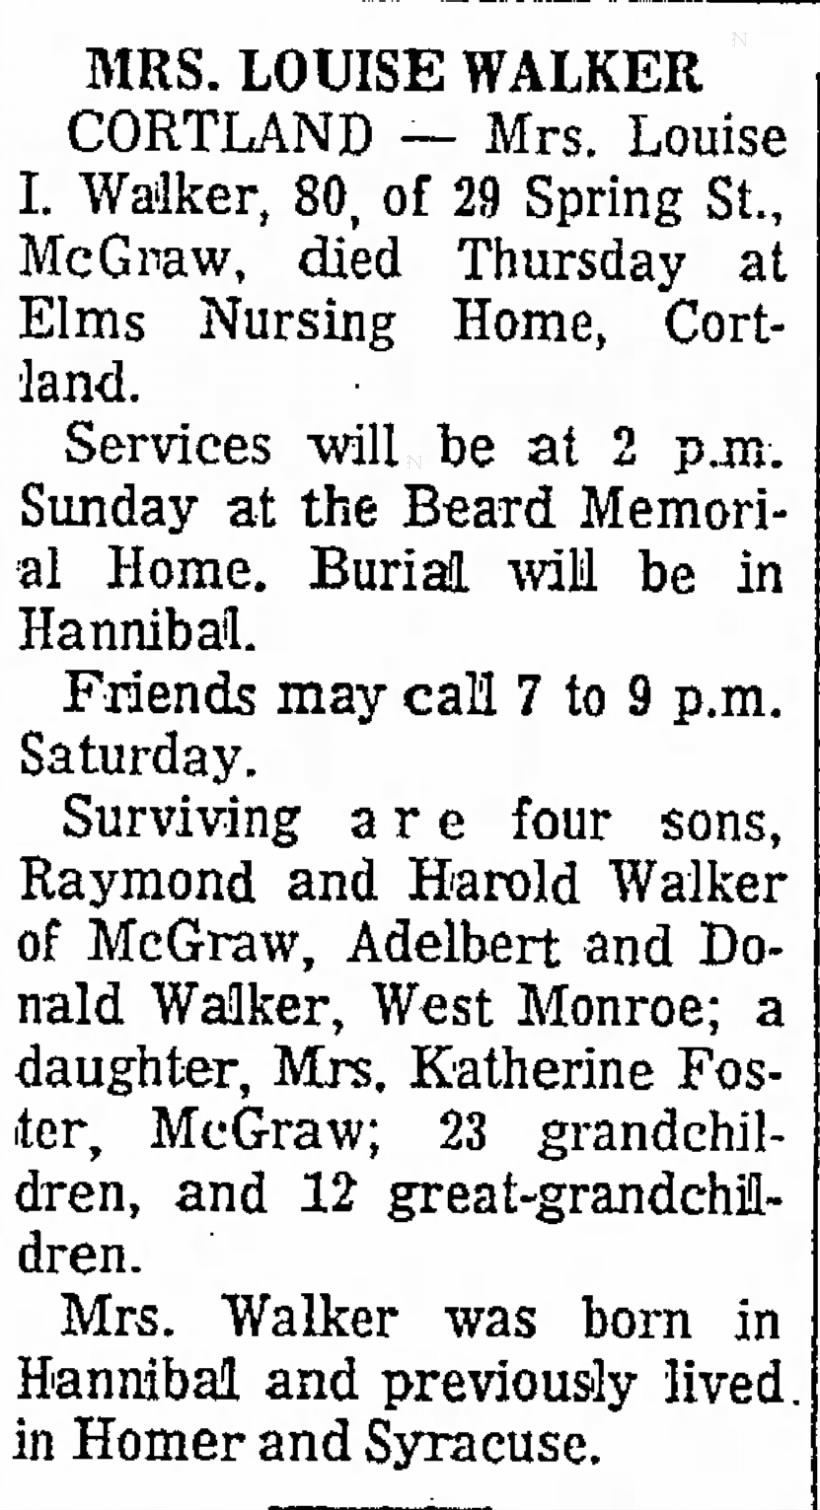 Louise (Buck) Walker Obituary
The Post-Standard (Syracuse) August 12, 1966